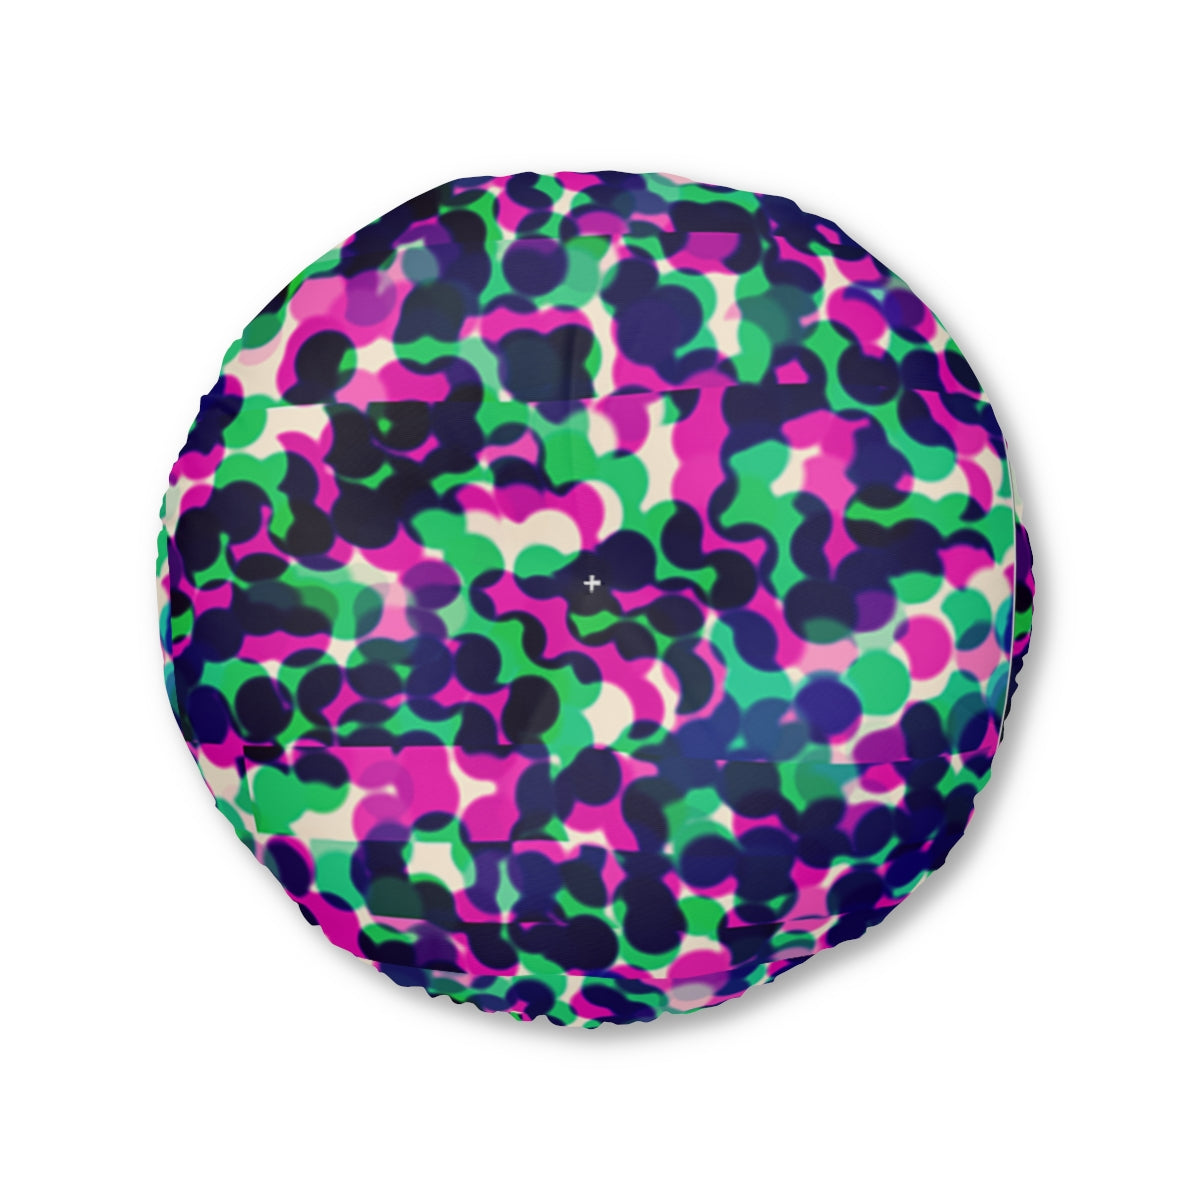 Trance Omni Nation 177 Tufted Floor Pillow, Round pillow, meditation pillow, design by Giovanna Sun, original coded art, double sided print